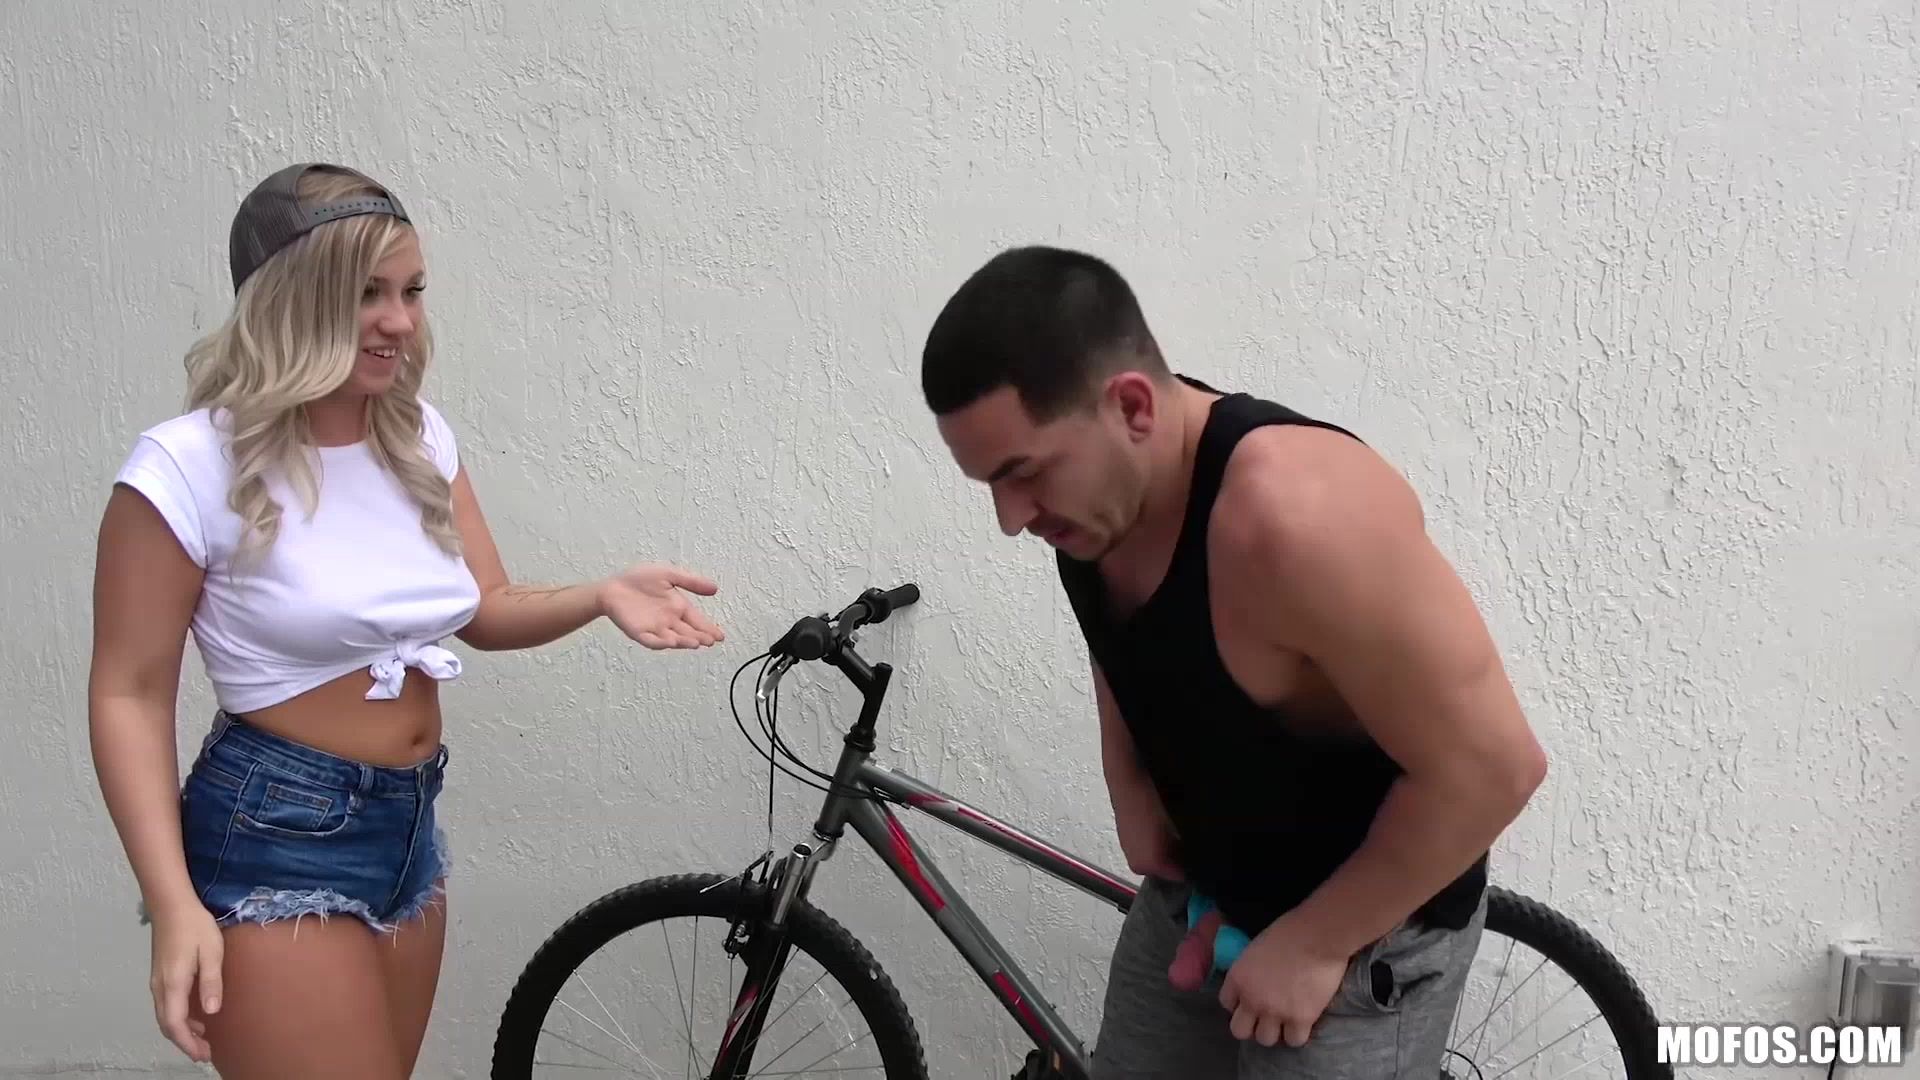 Hermana Two hotties punish a bike thief by making him fuck them Pounded